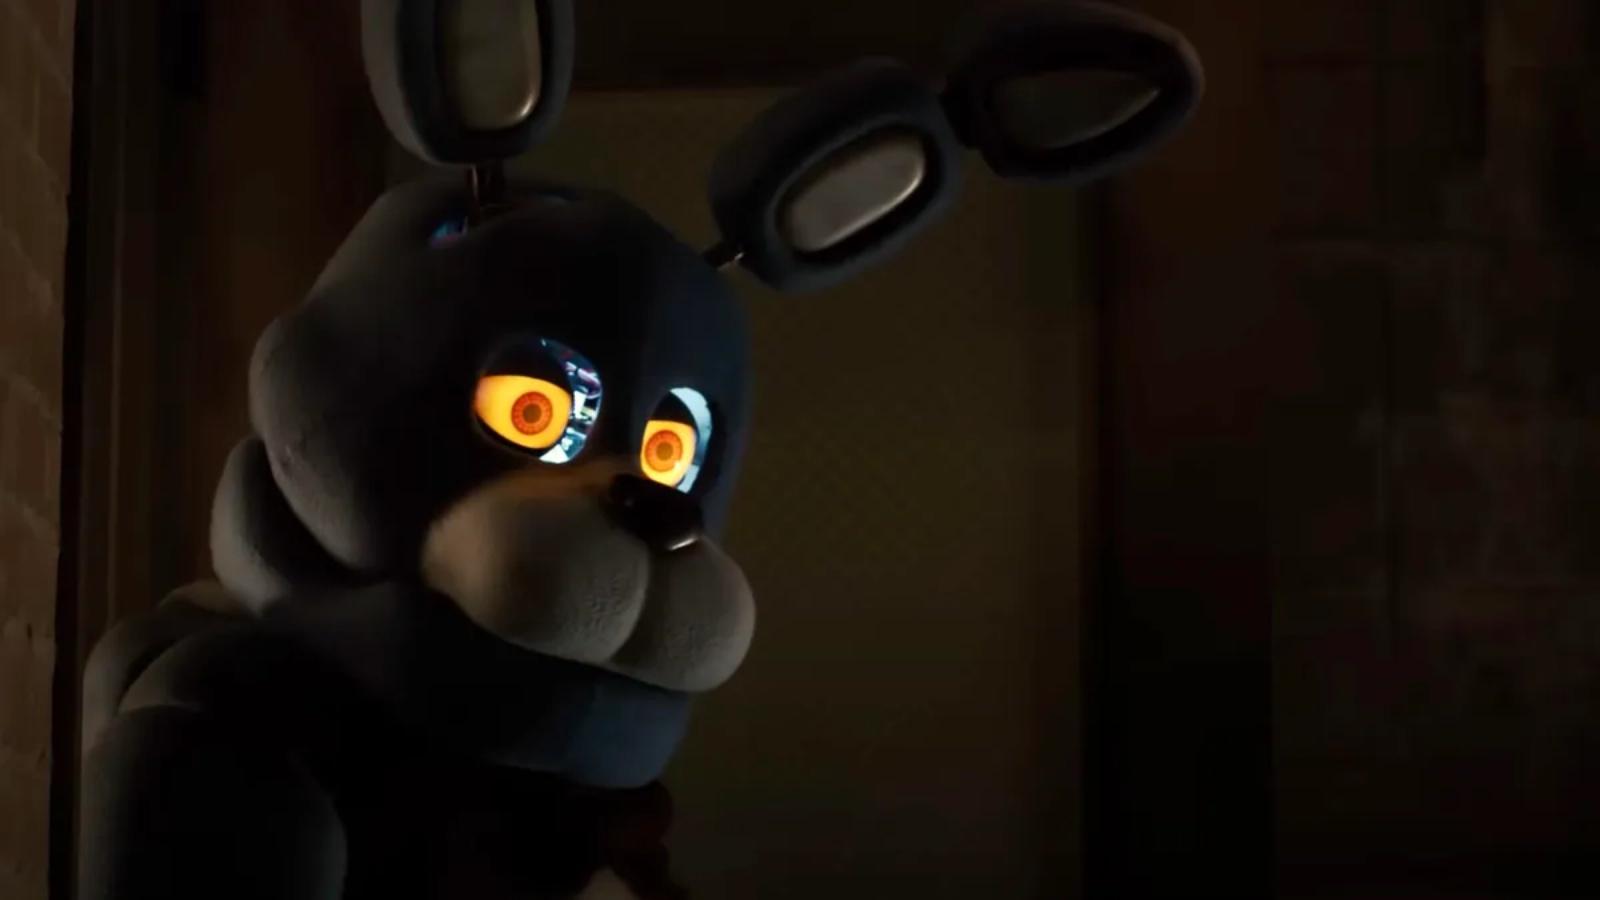 Does 'Five Nights at Freddy's' Have a Post-Credits Scene?